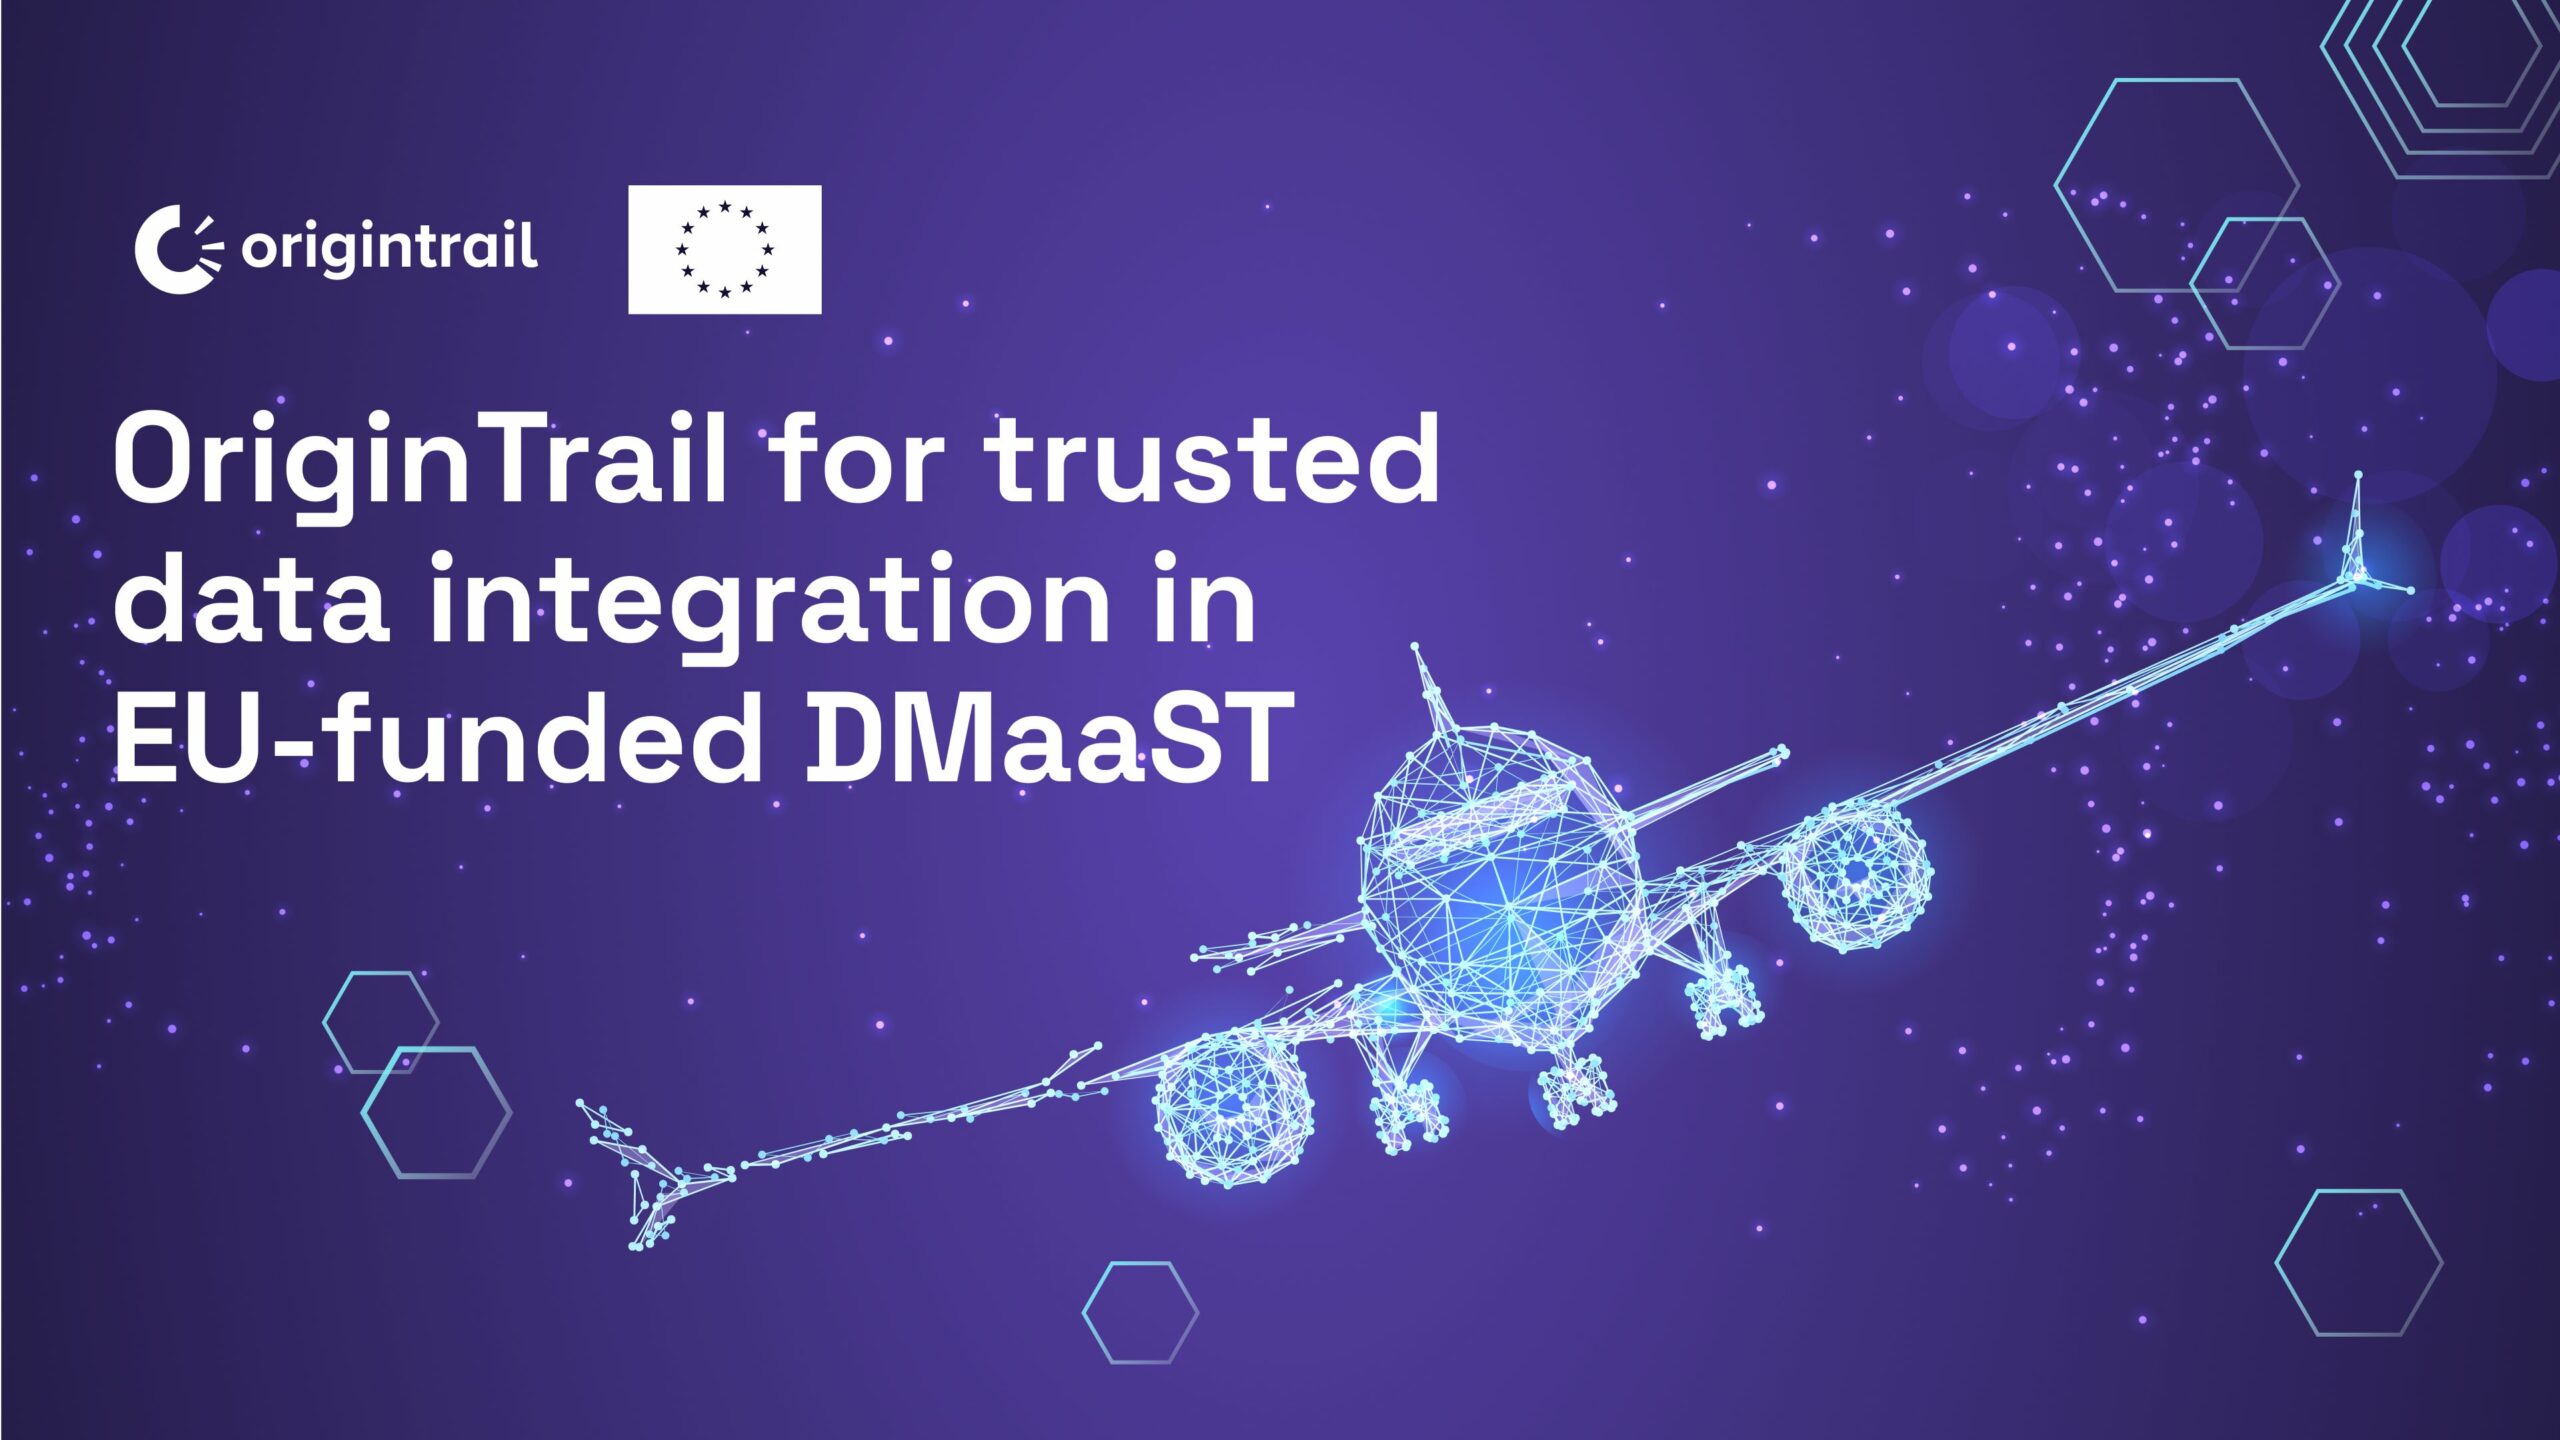 , OriginTrail Decentralized Knowledge Graph for trusted cross-organization real-time data integration in EU-funded DMaaST